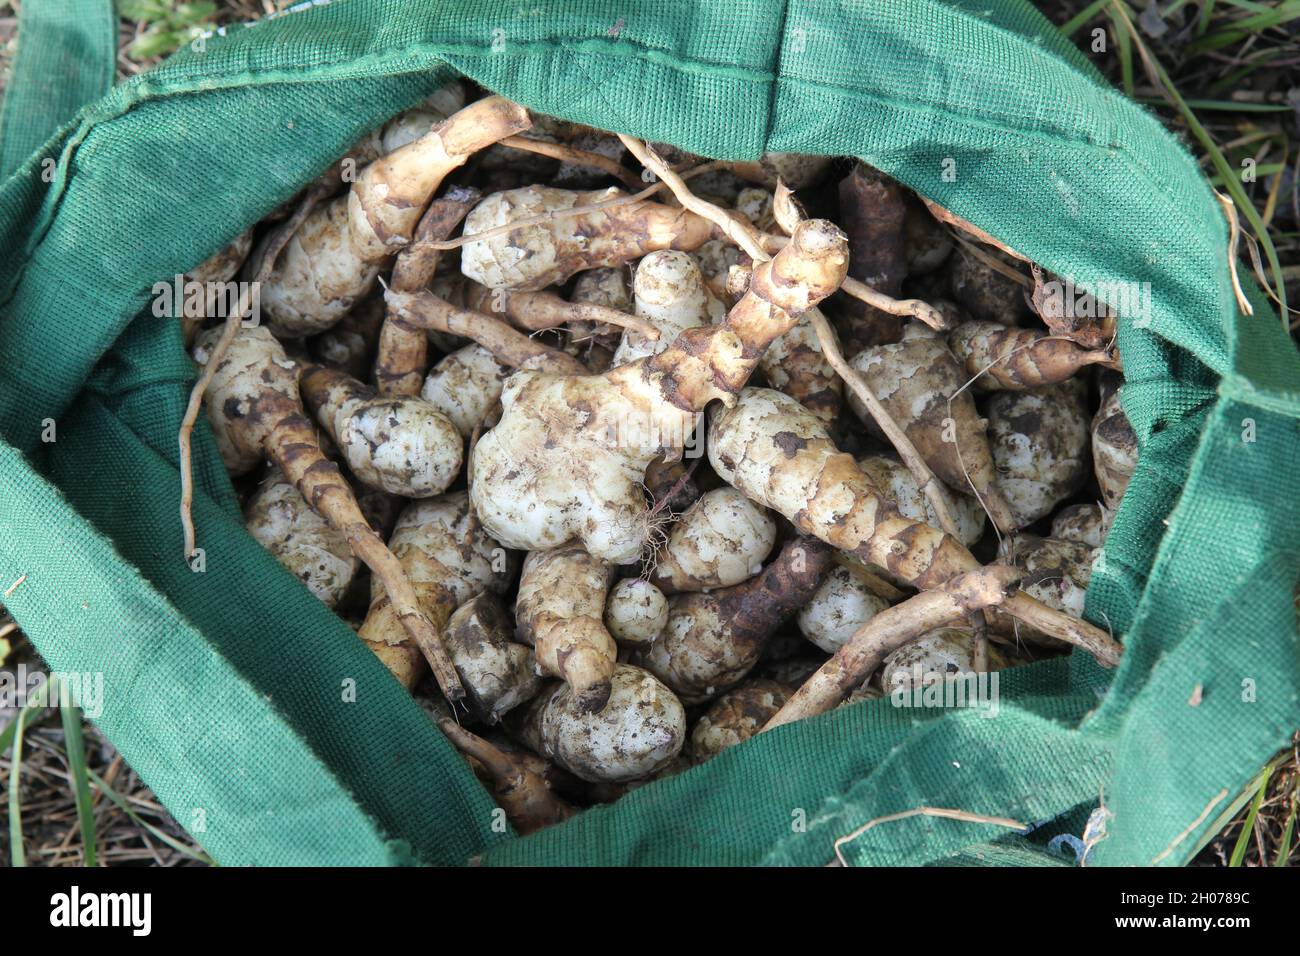 Fresh topinambour harvest, sunchoke from field, collected in a green bag. Symbol for field work, agriculture, healthy roots. Stock Photo